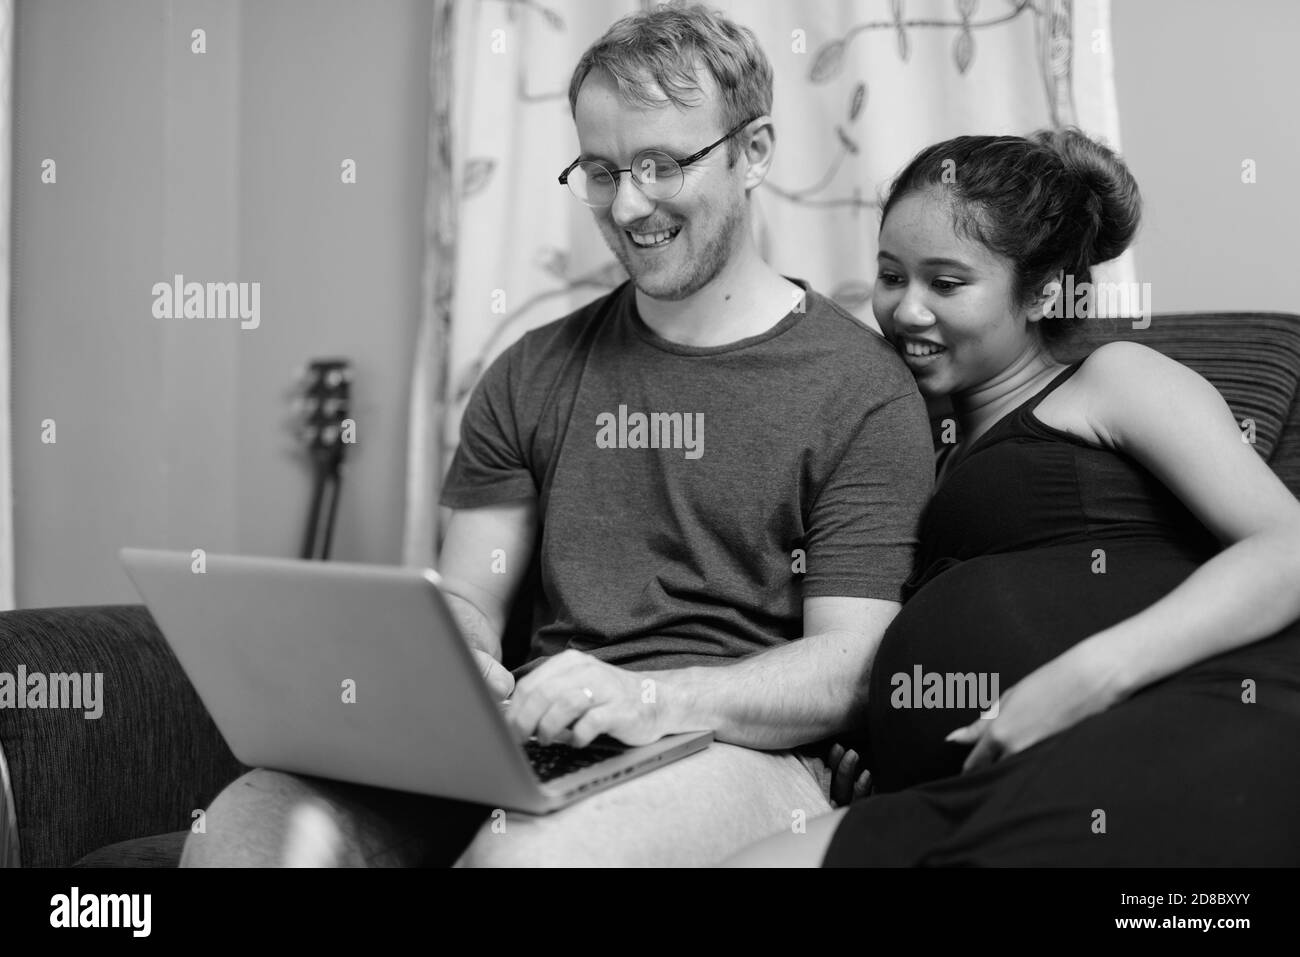 Multi ethnic couple married and in love in the living room Stock Photo